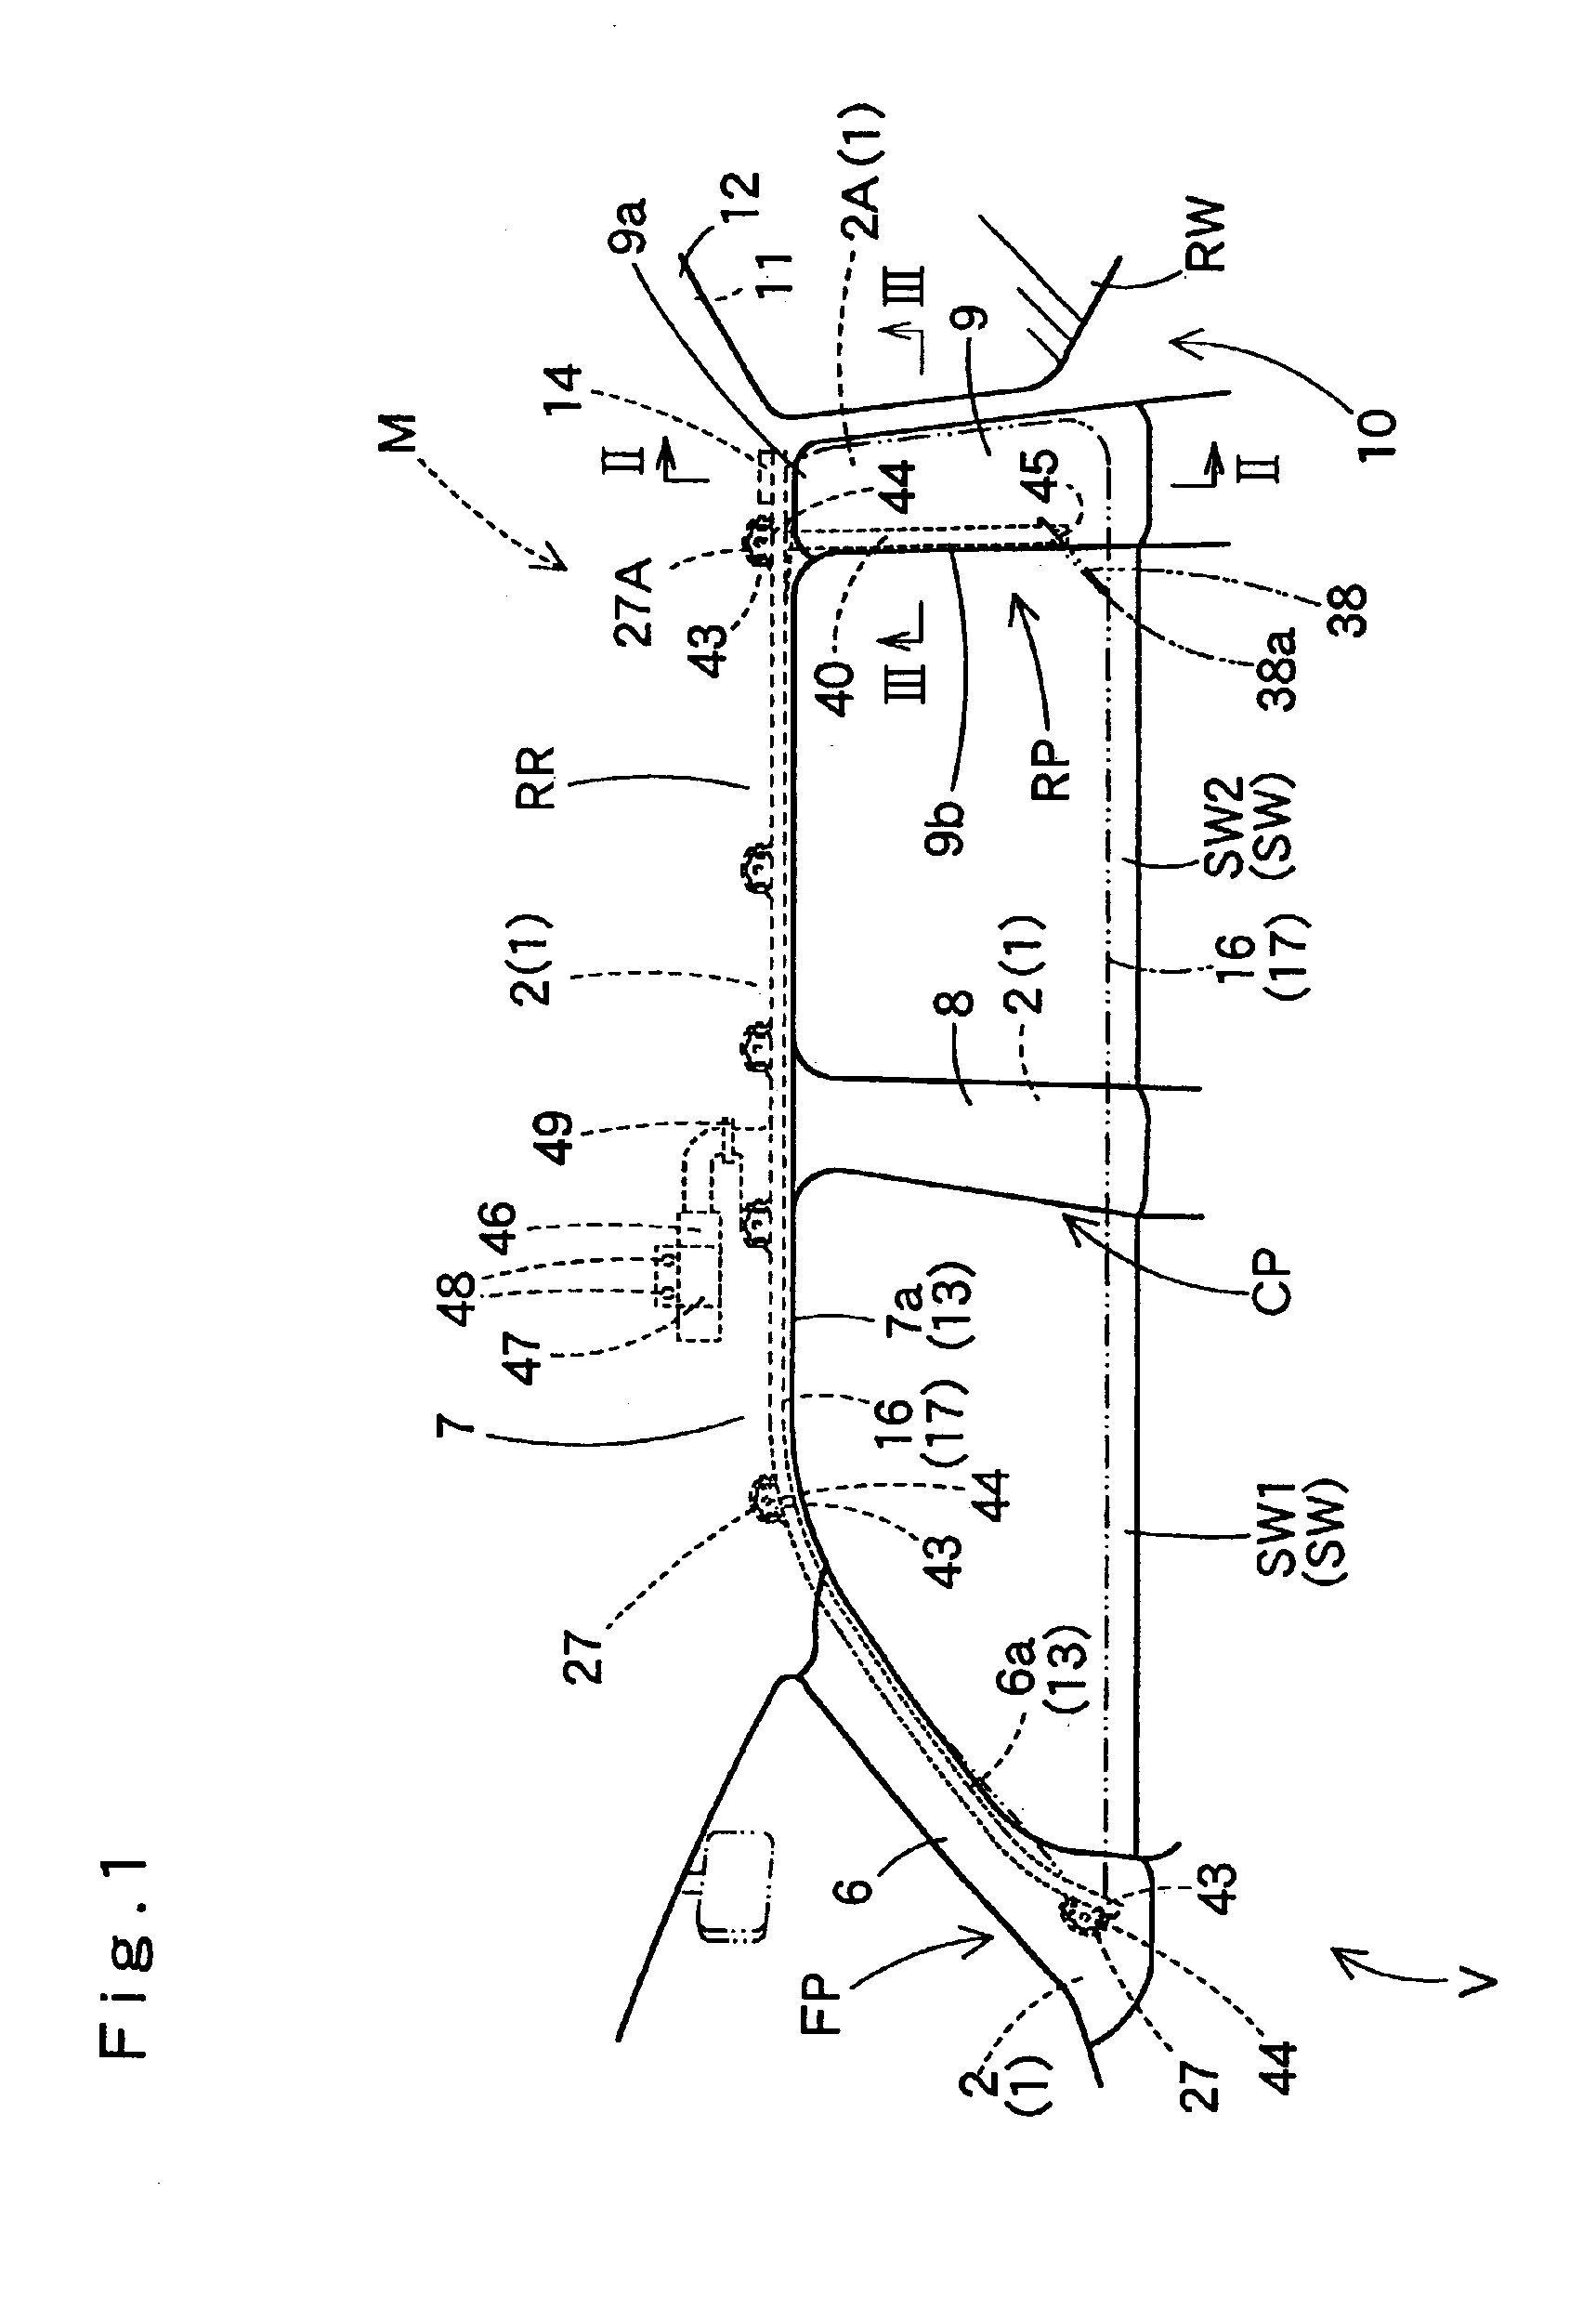 Head protecting airbag device